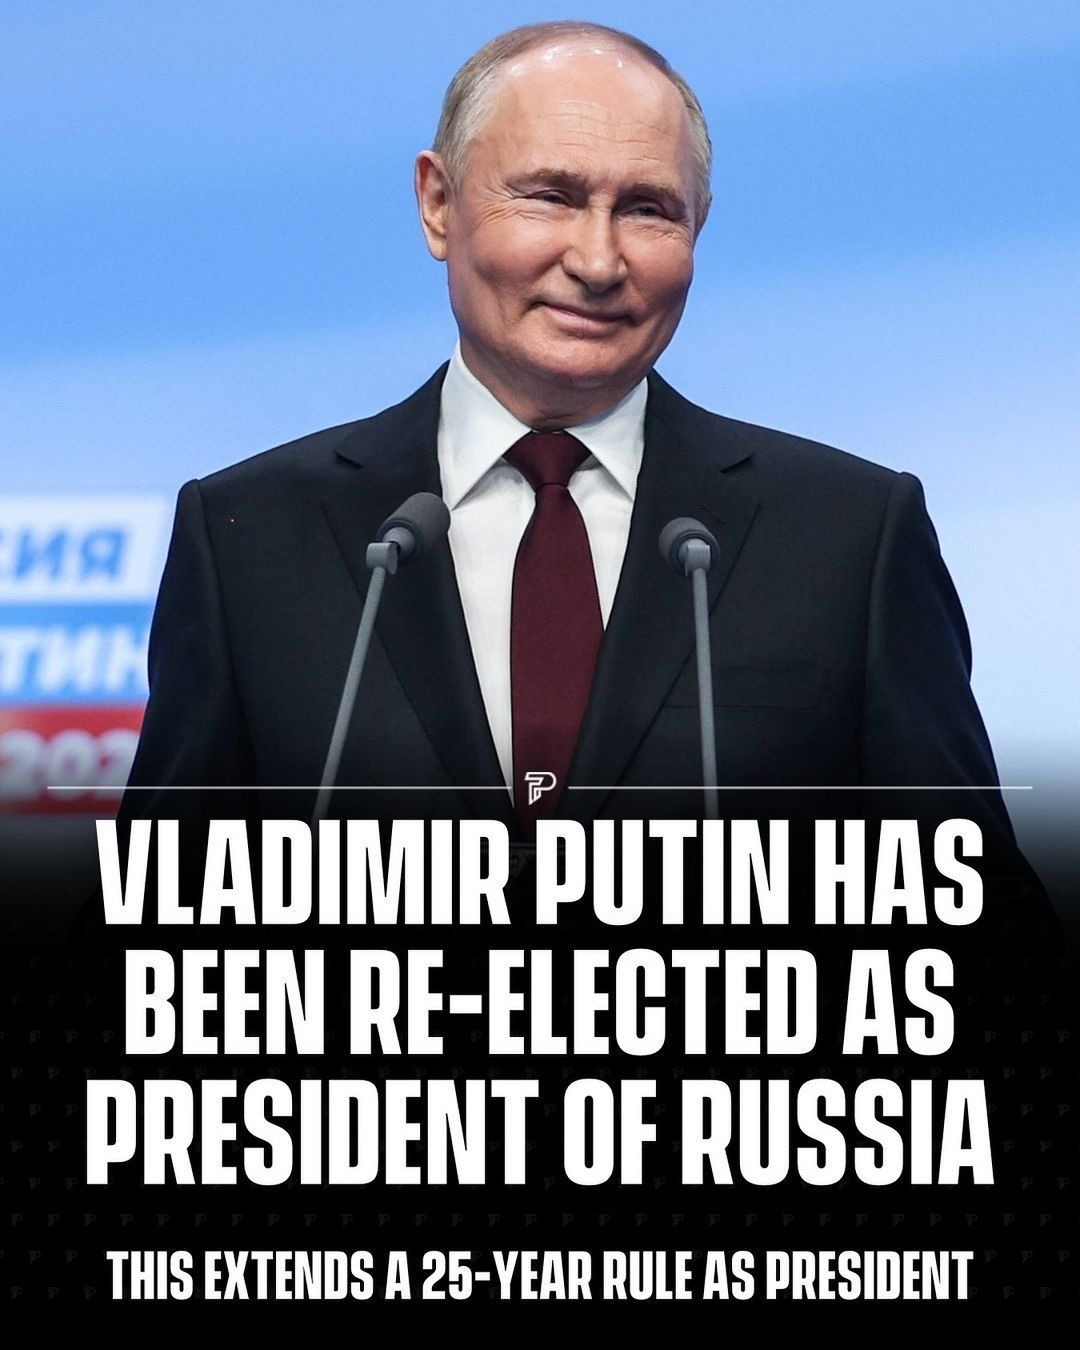 "The Candidates were: Putin, Missing, Fled, Abducted" - meme